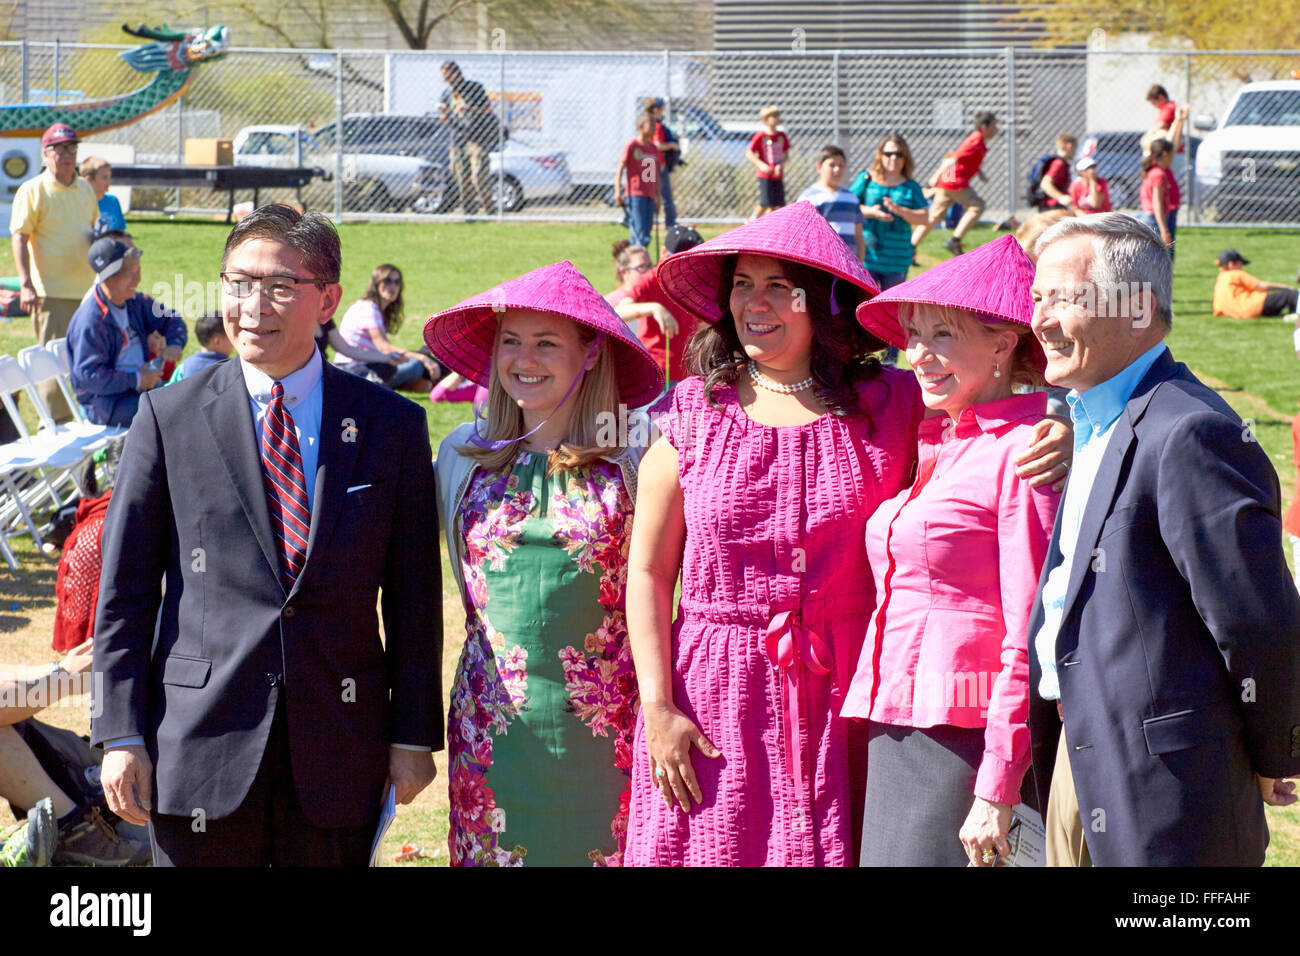 Phoenix, Arizona, USA. 12th February, 2016. Barry Wong, Kate Gallegos,  Laura Pastor, Judy Schumacher, and Jerry Lewis pose for a group photo after  the opening ceremonies for Phoenix Chinese Week. The event